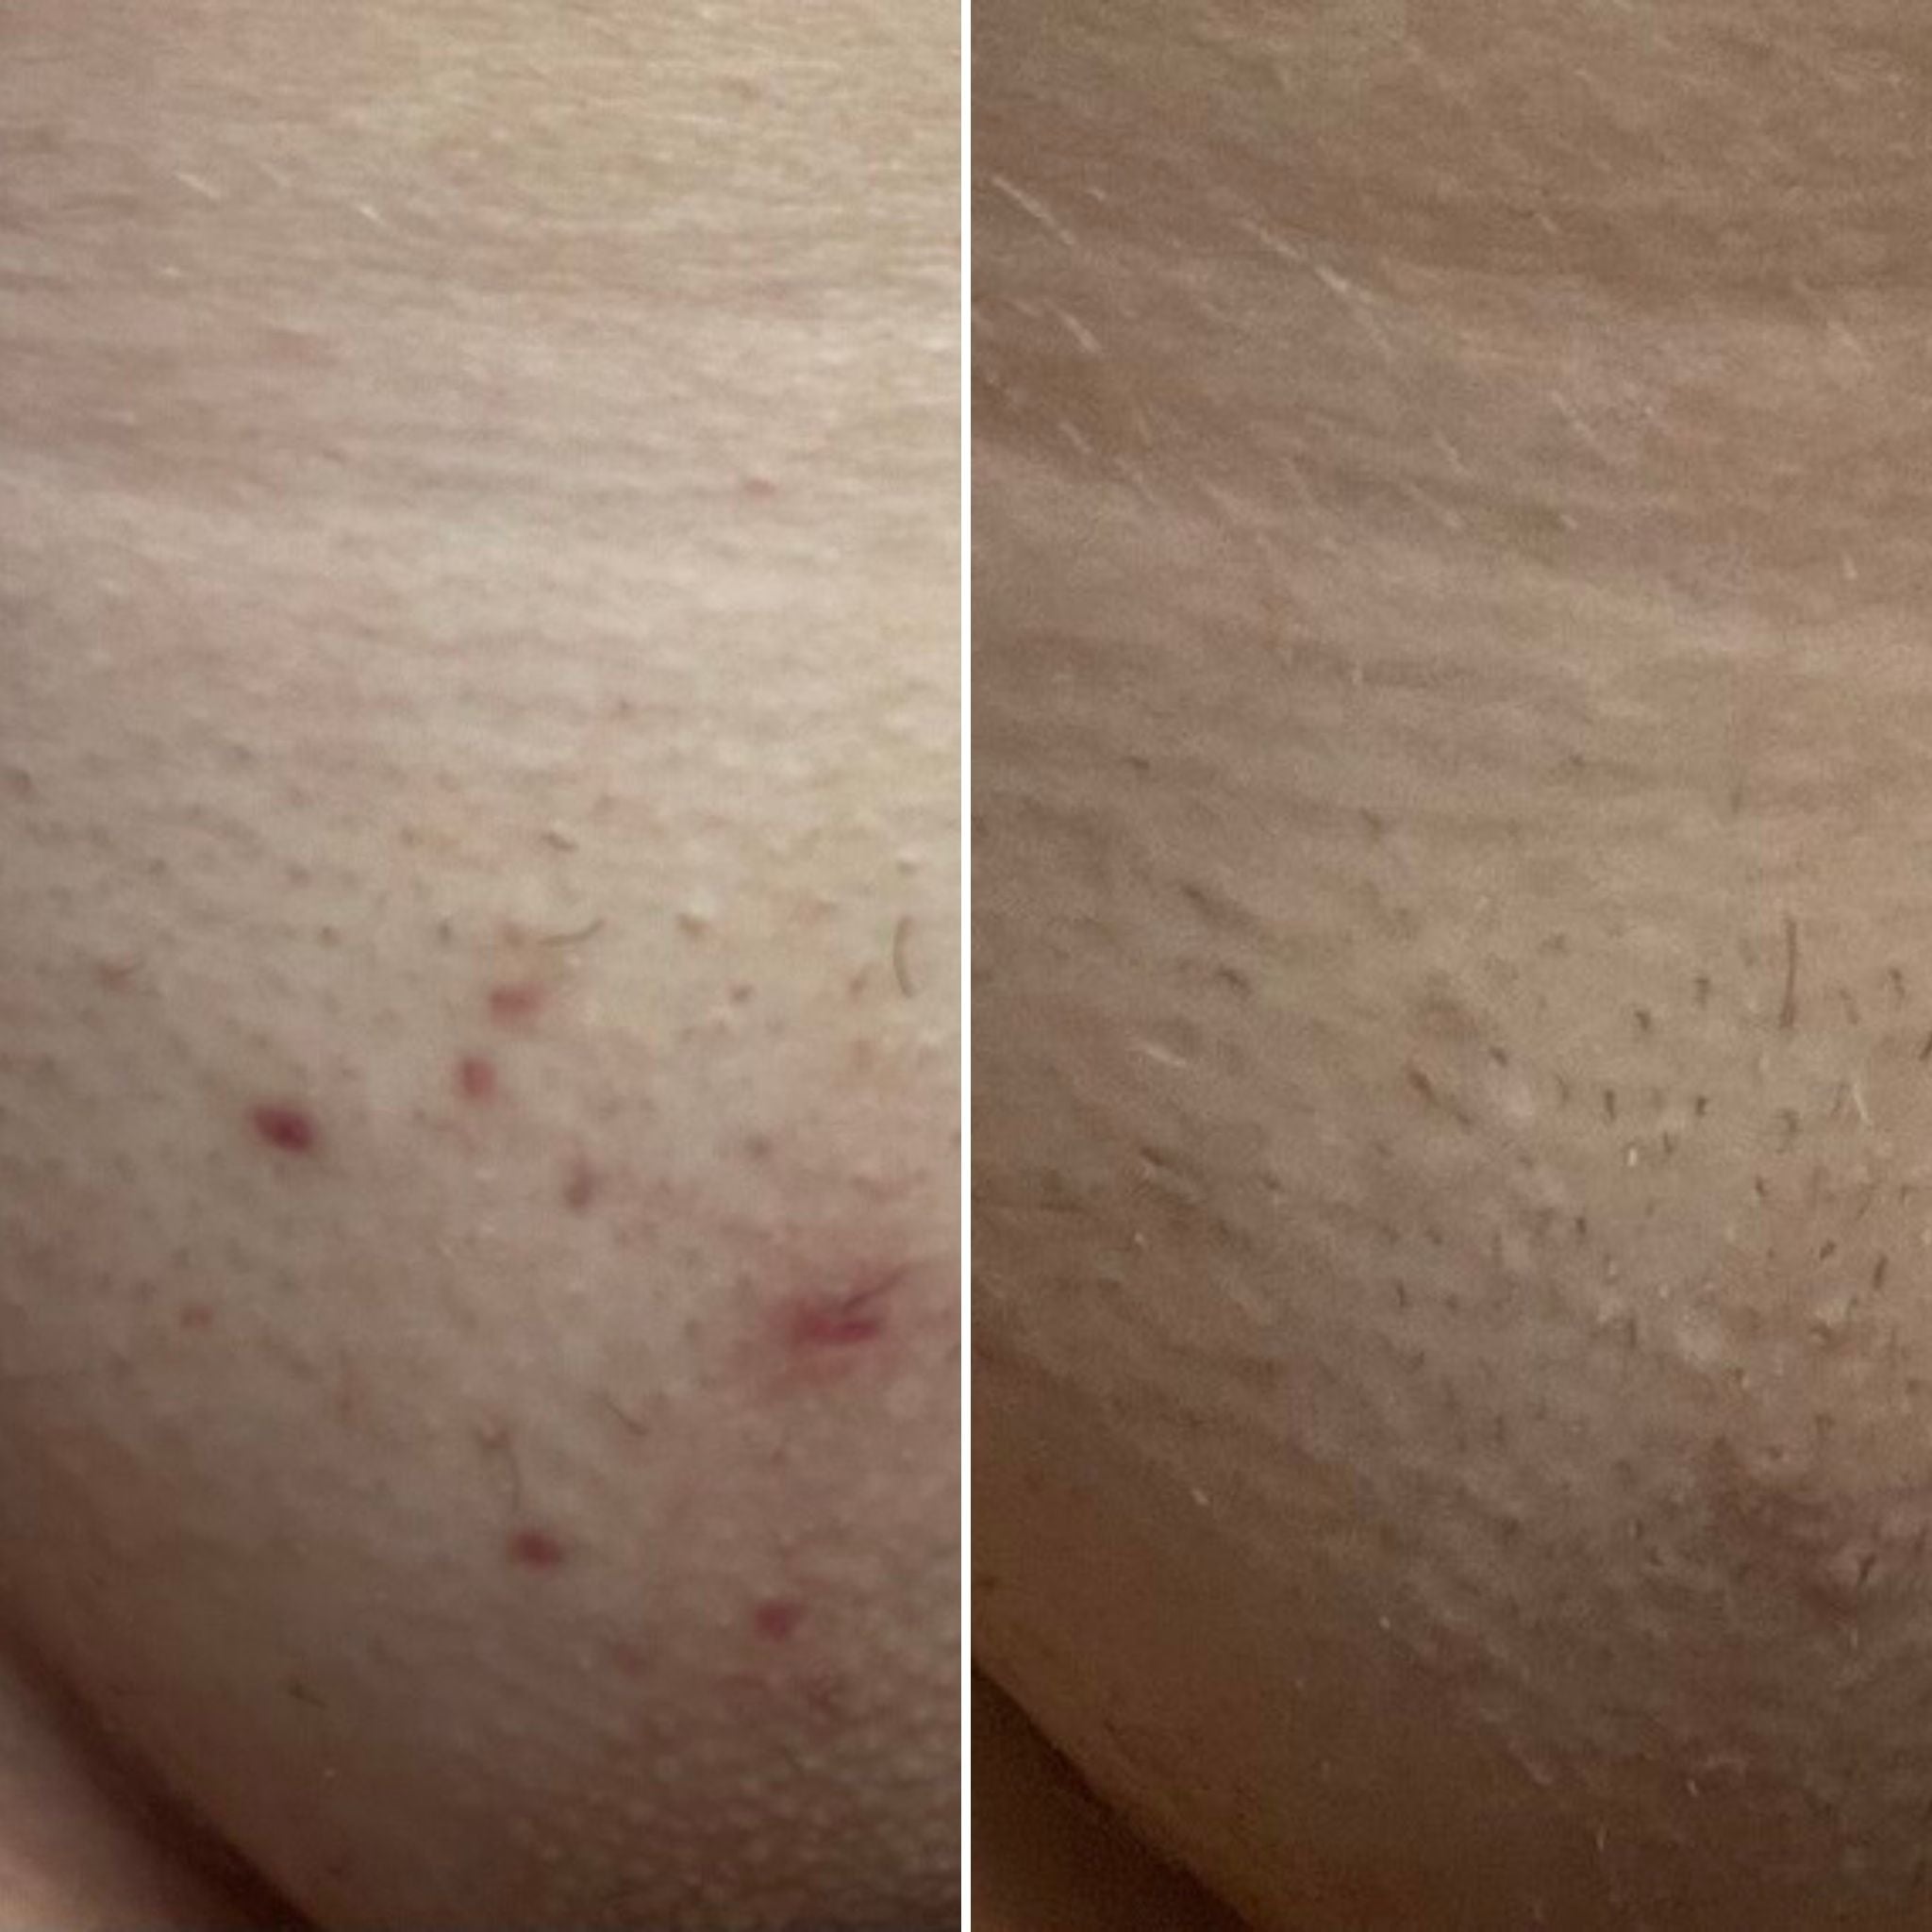 BEfore and after using Bushbalm ingrown hair on thigh